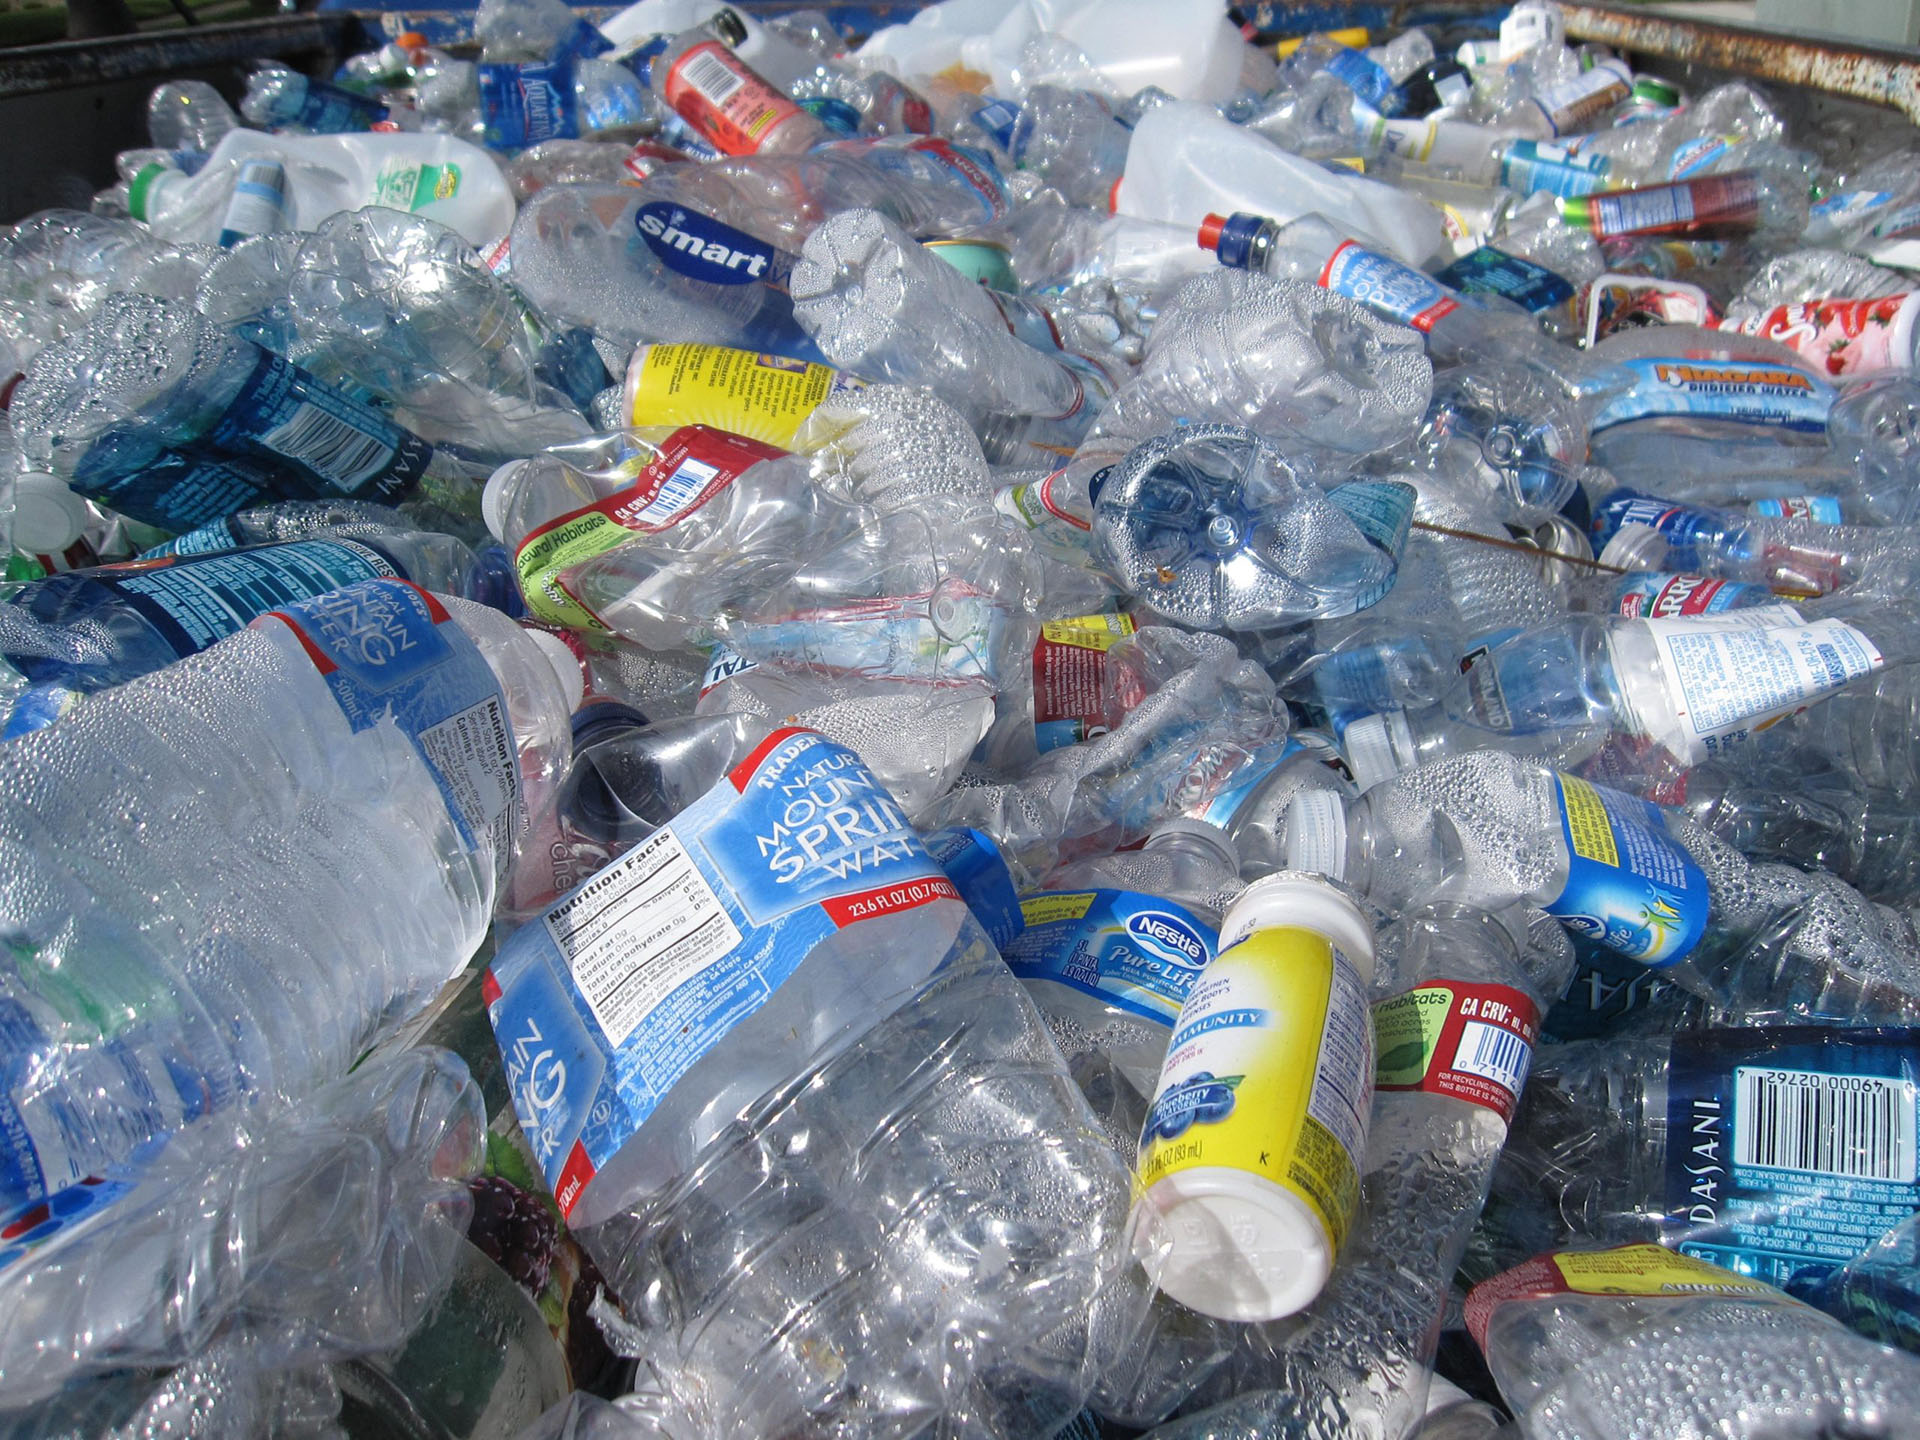 PS Paper: Introducing plastics sustainability into your business